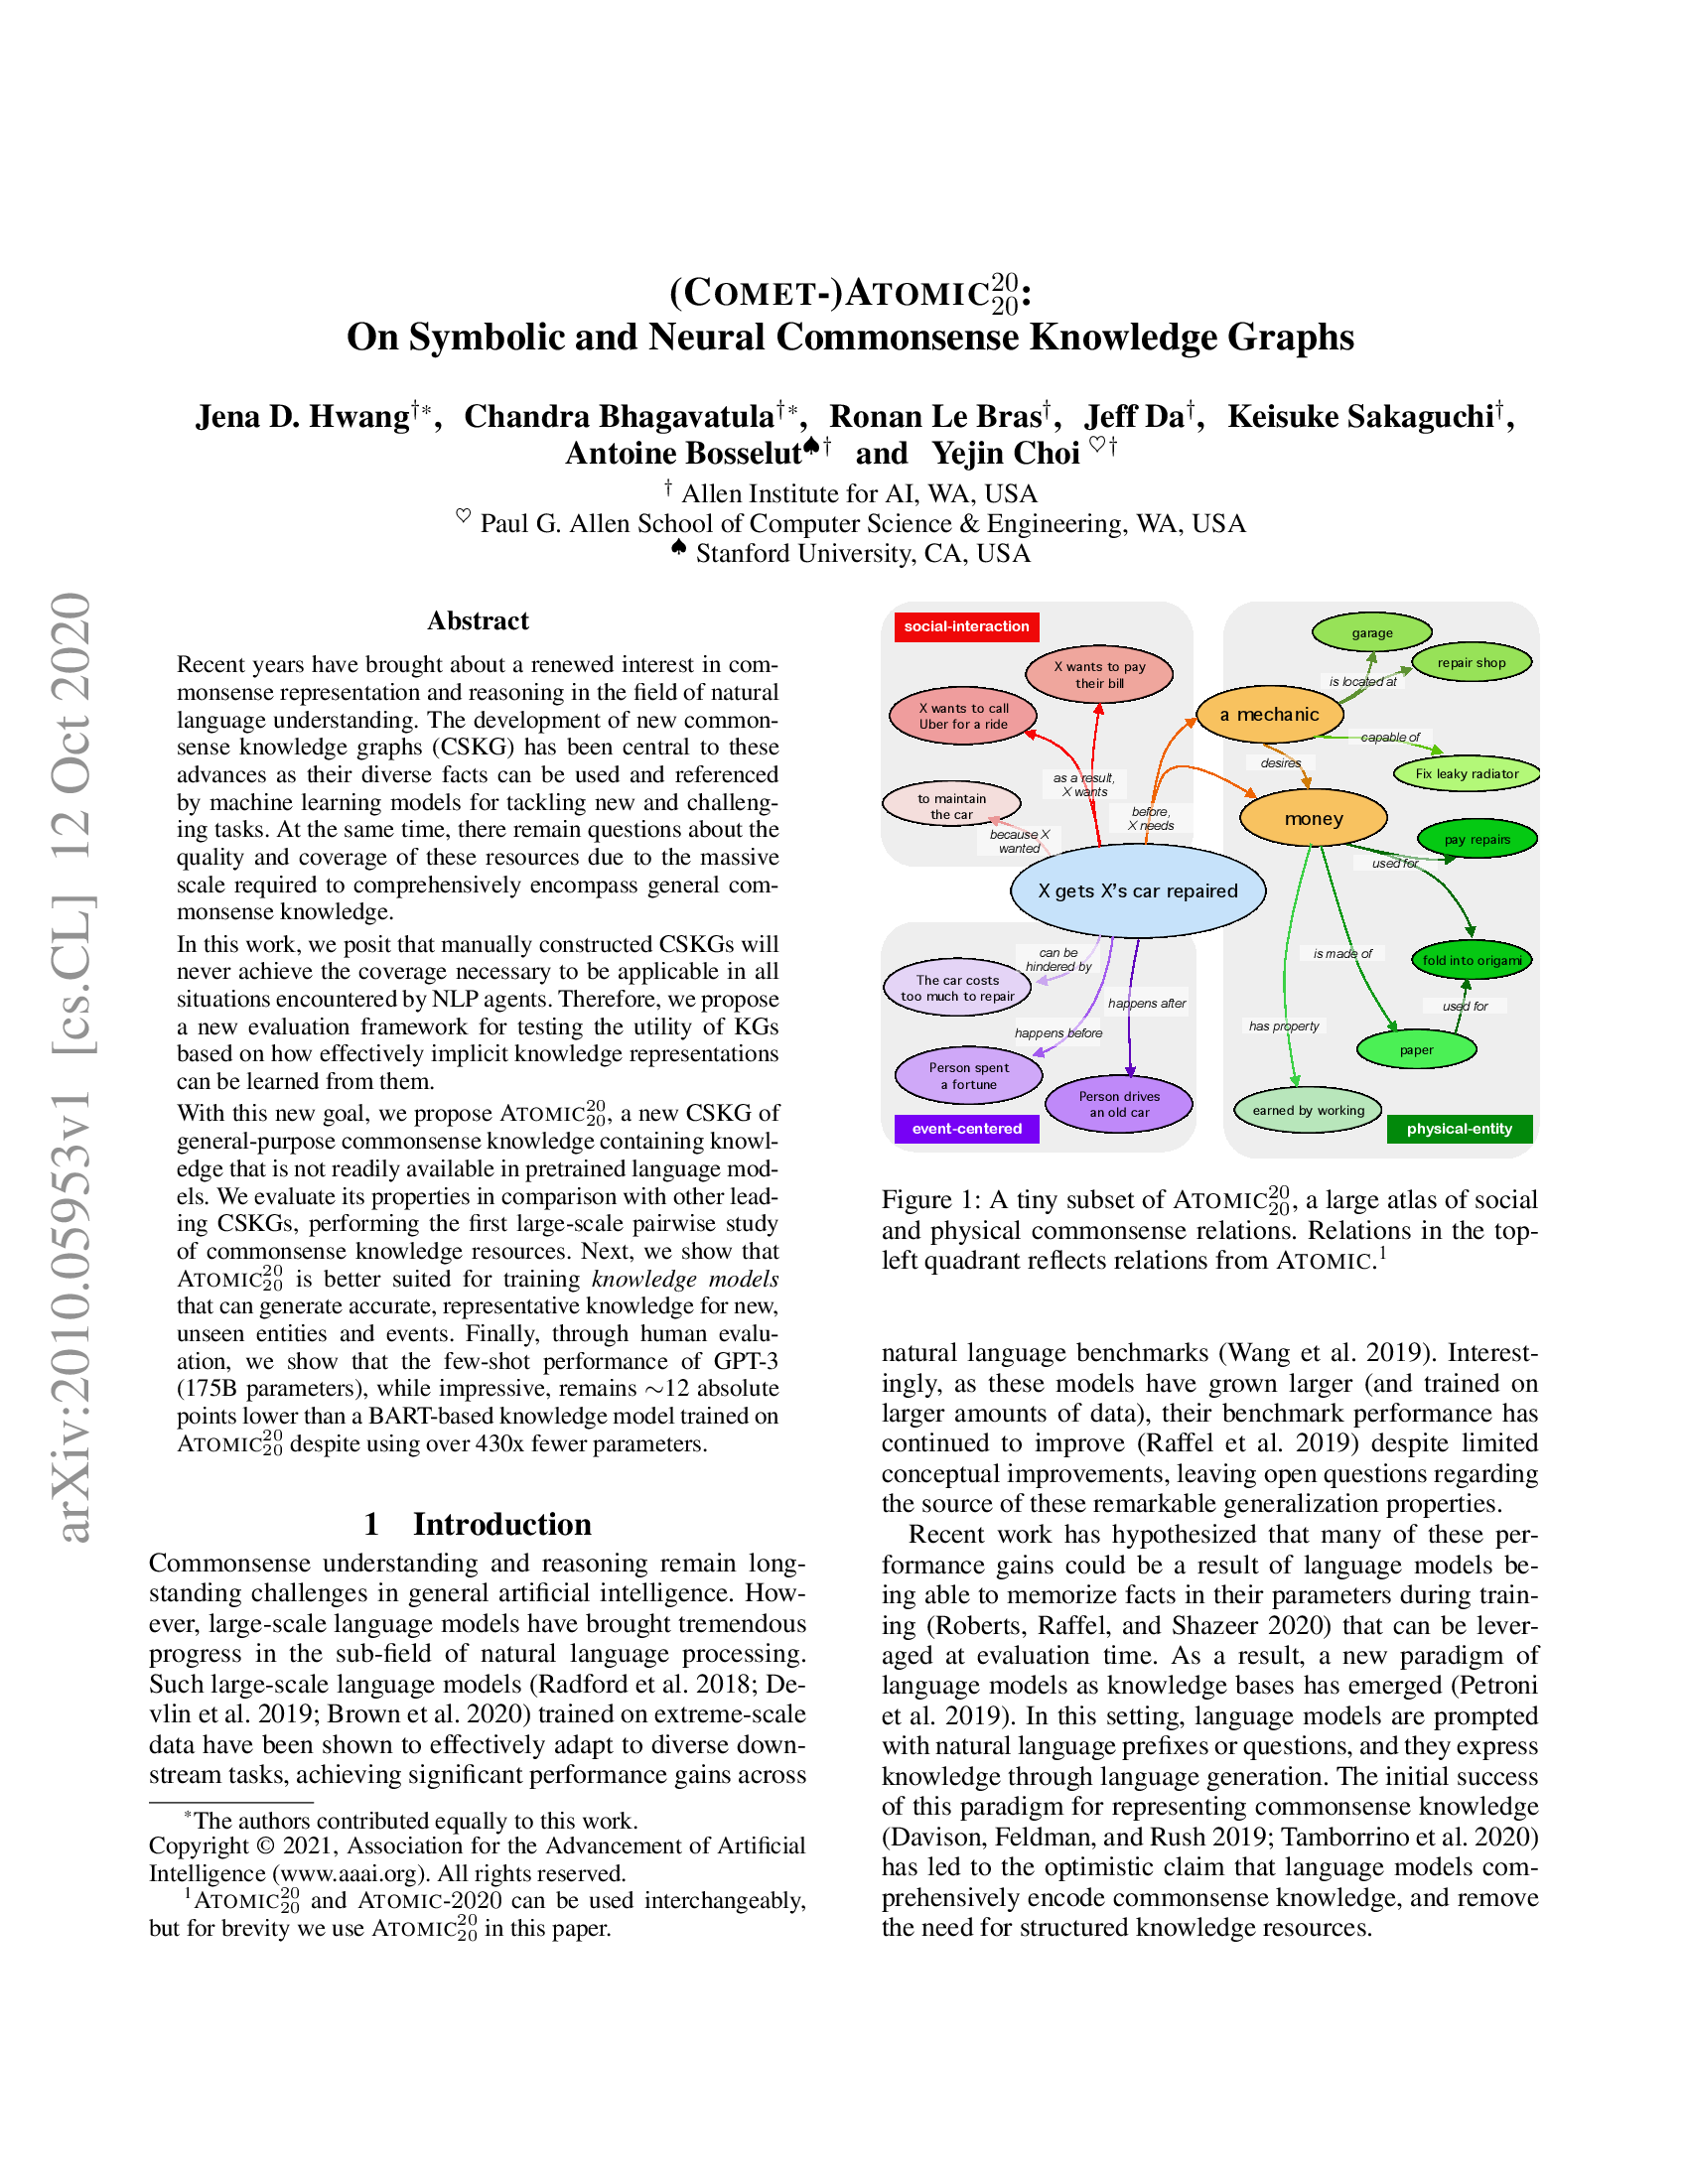 COMET-ATOMIC 2020: On Symbolic and Neural Commonsense Knowledge Graphs